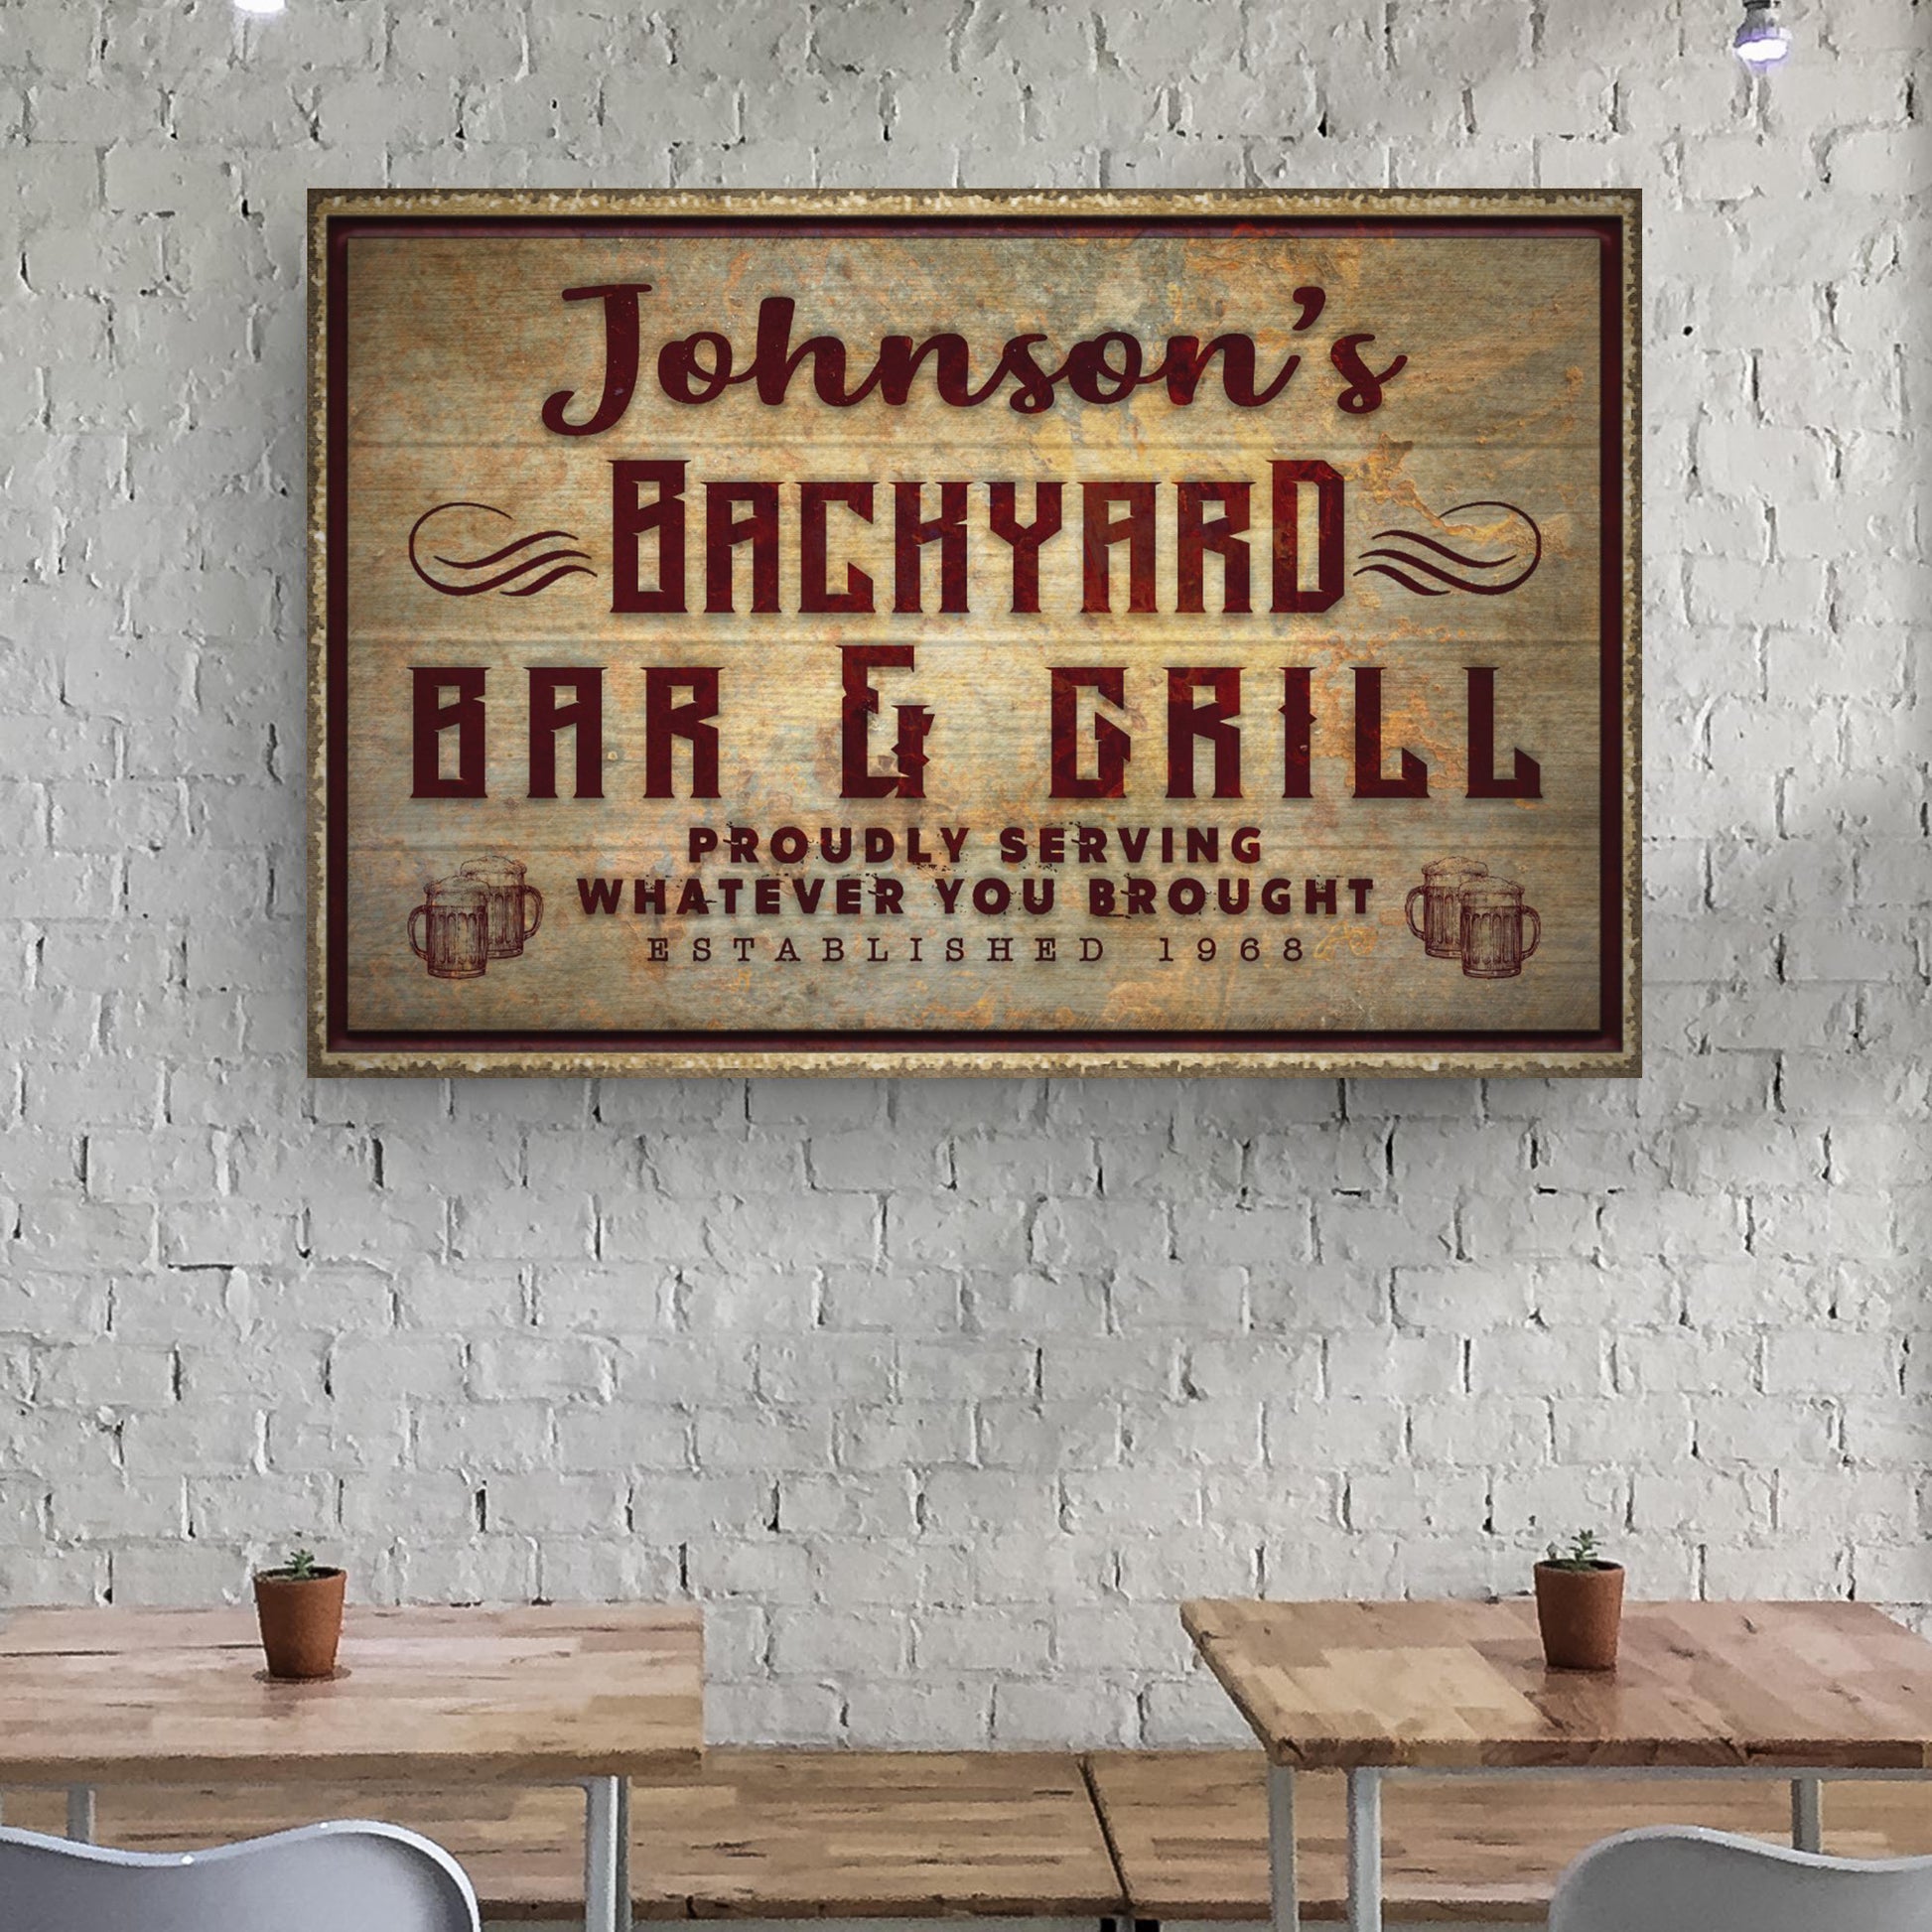 Backyard Bar & Grill Sign VII Style 2 - Image by Tailored Canvases